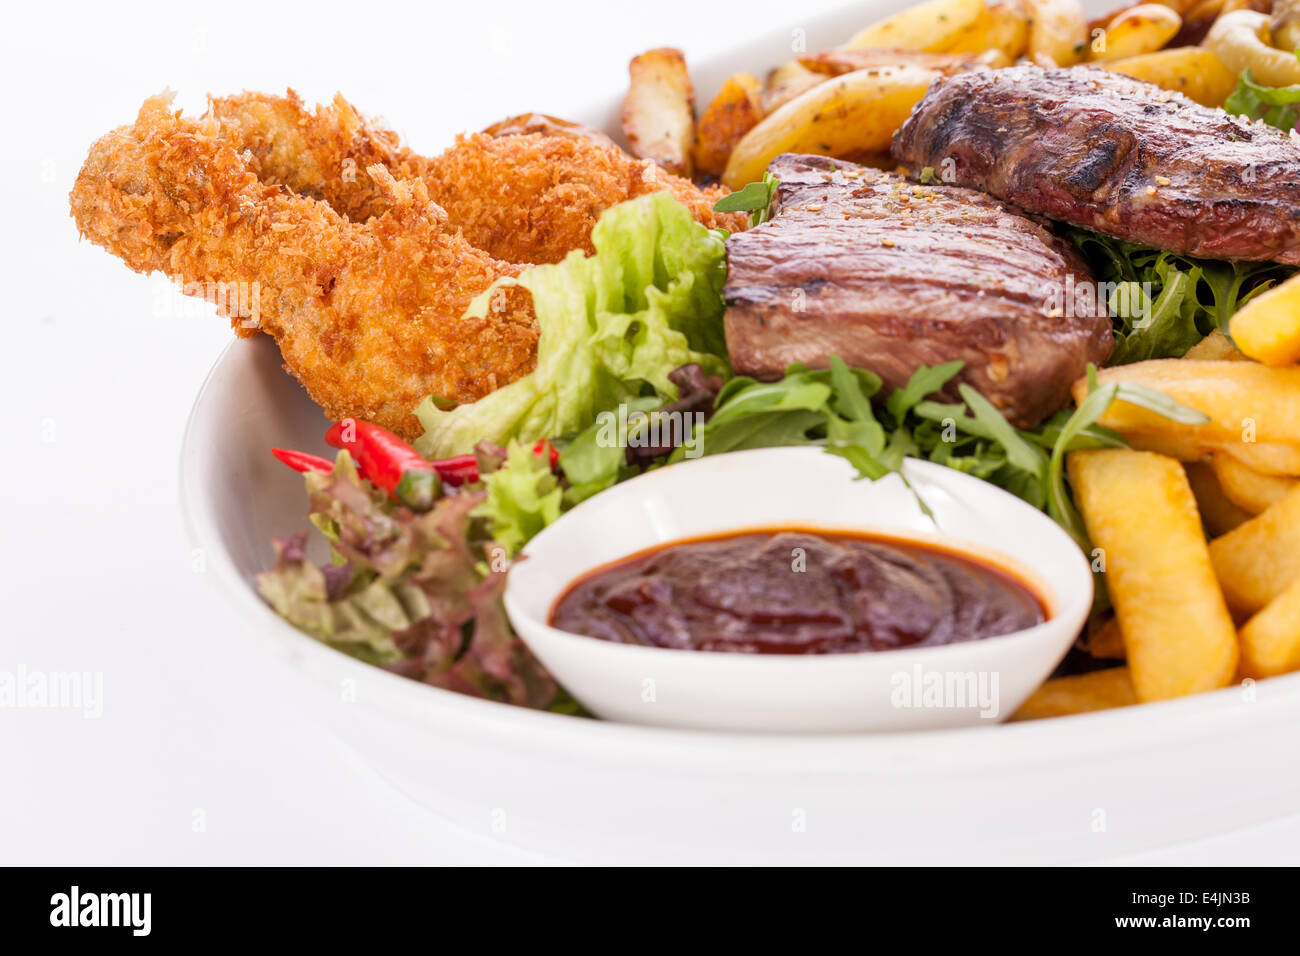 Wholesome platter of mixed meats including grilled steak, crispy crumbed chicken and beef on a bed of fresh leafy green mixed sa Stock Photo